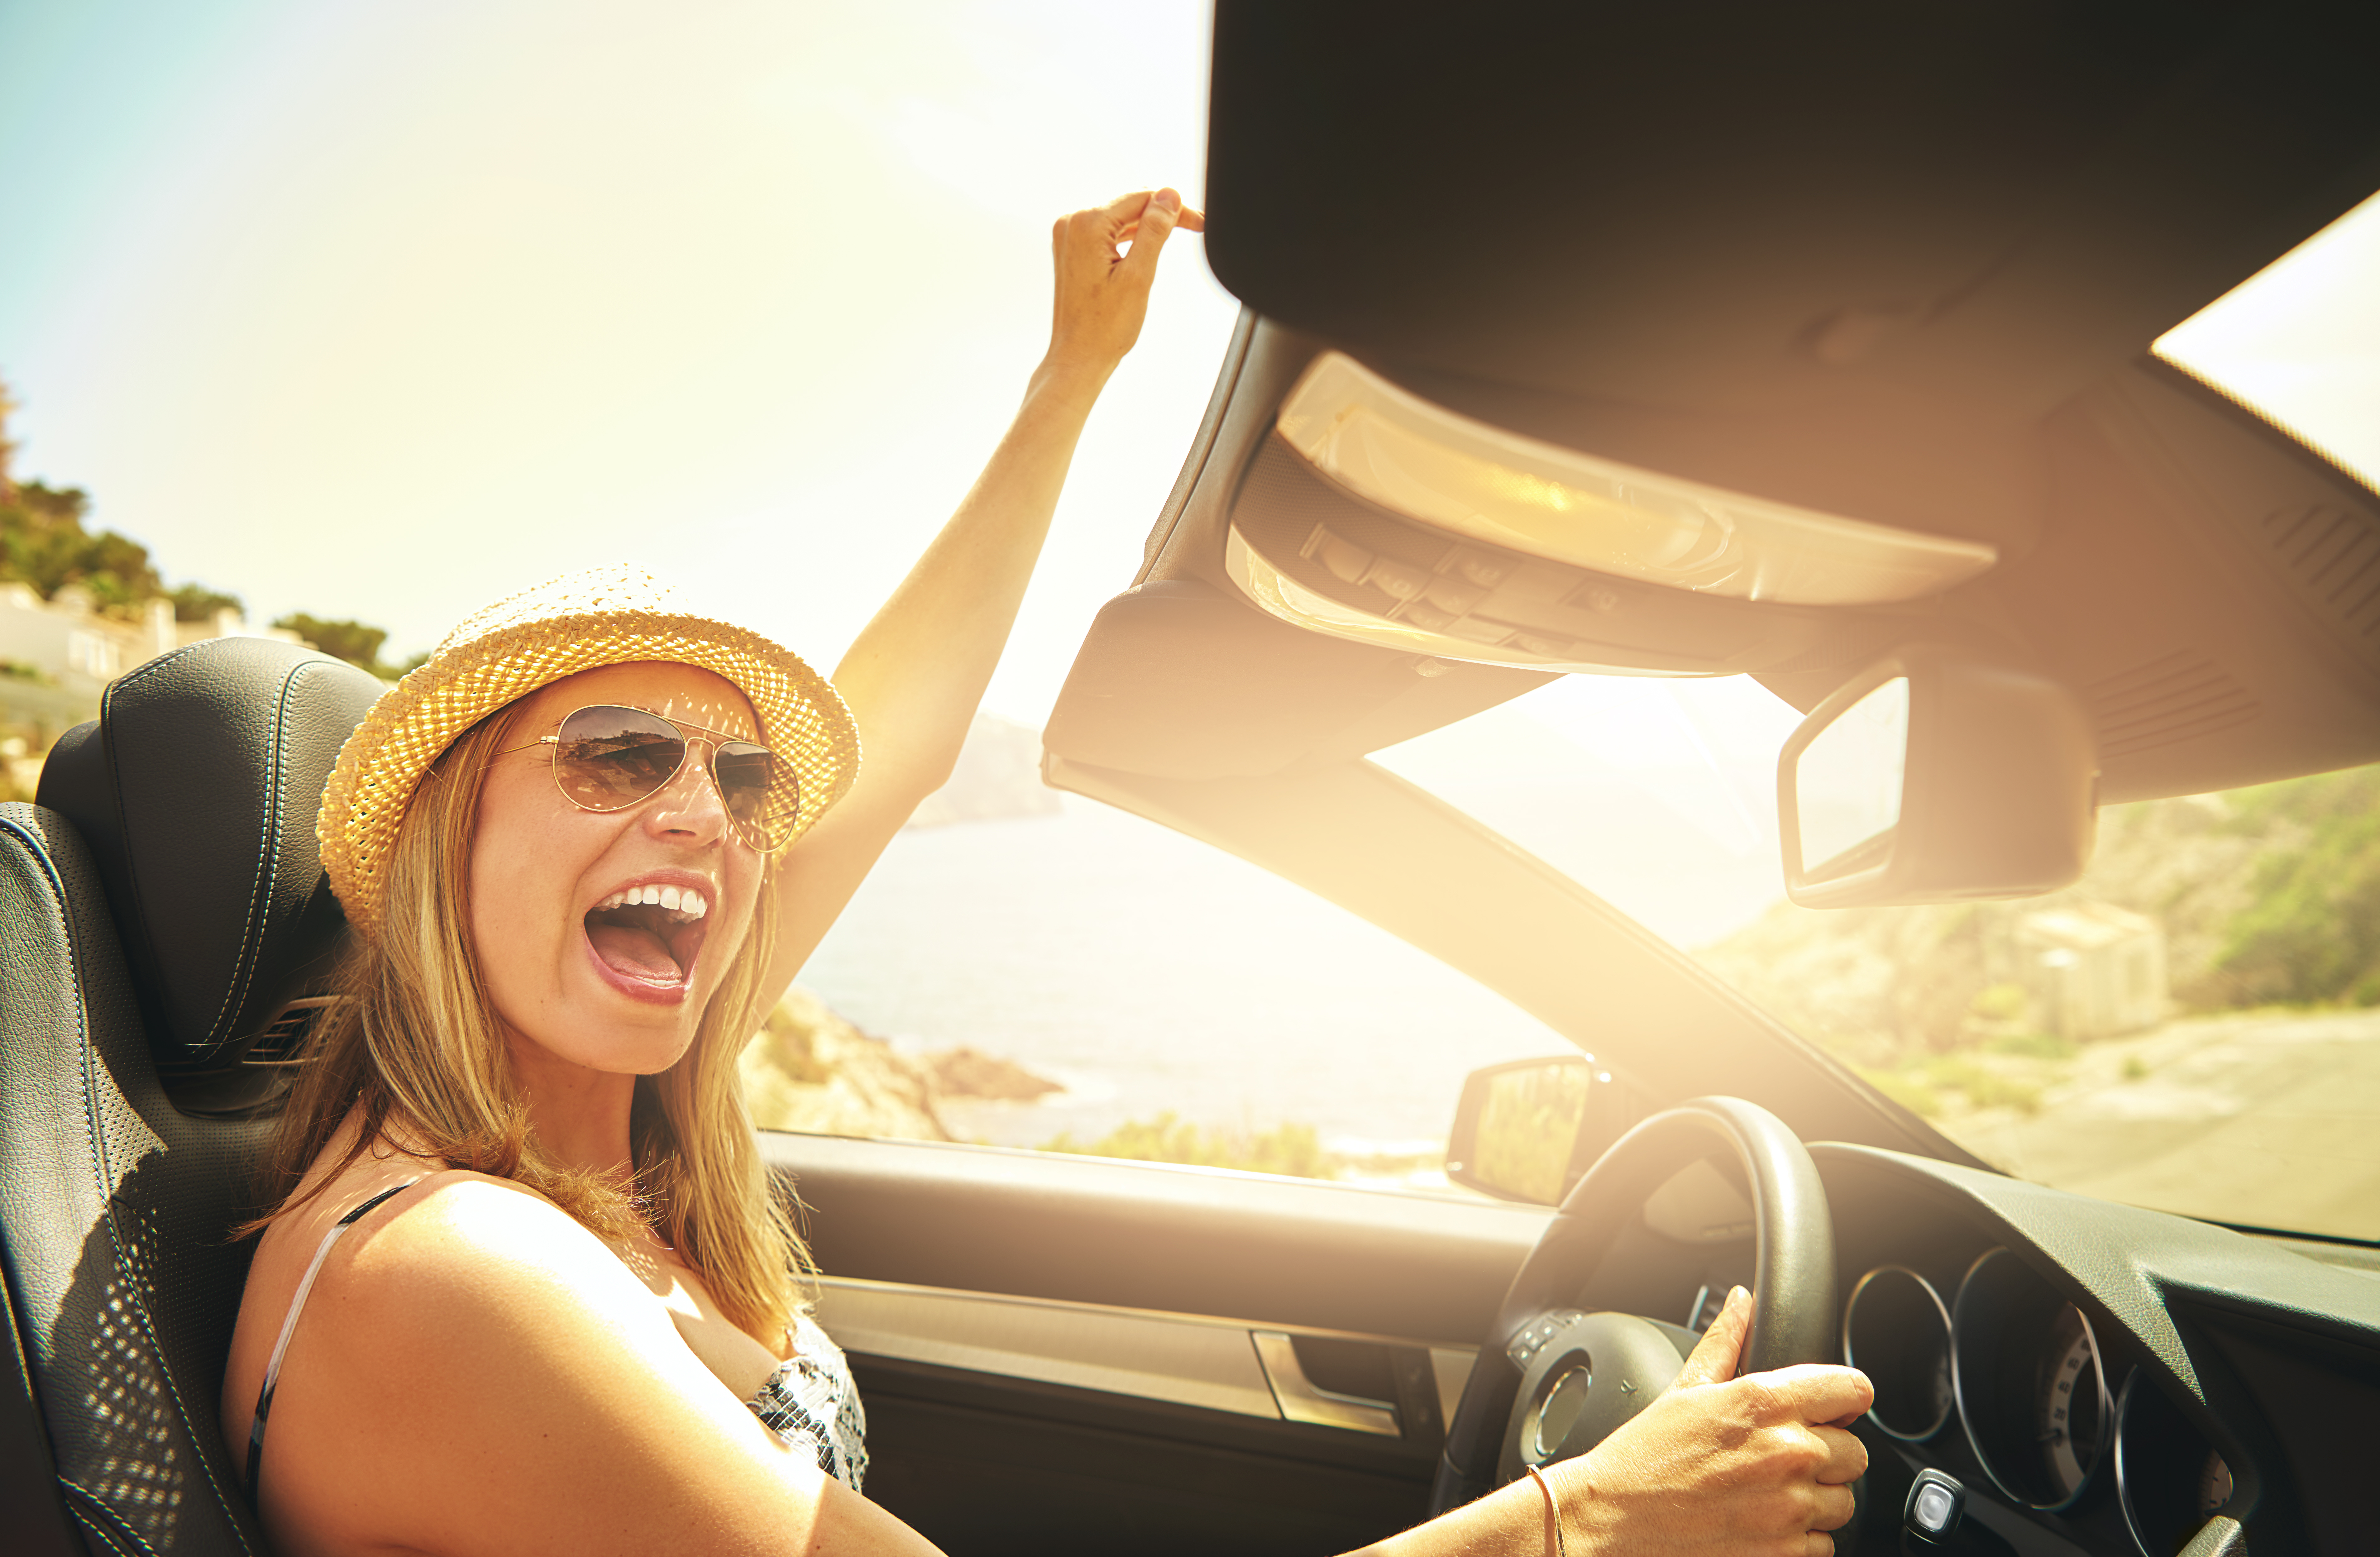 Get 2023 started right with these car-based resolutions!